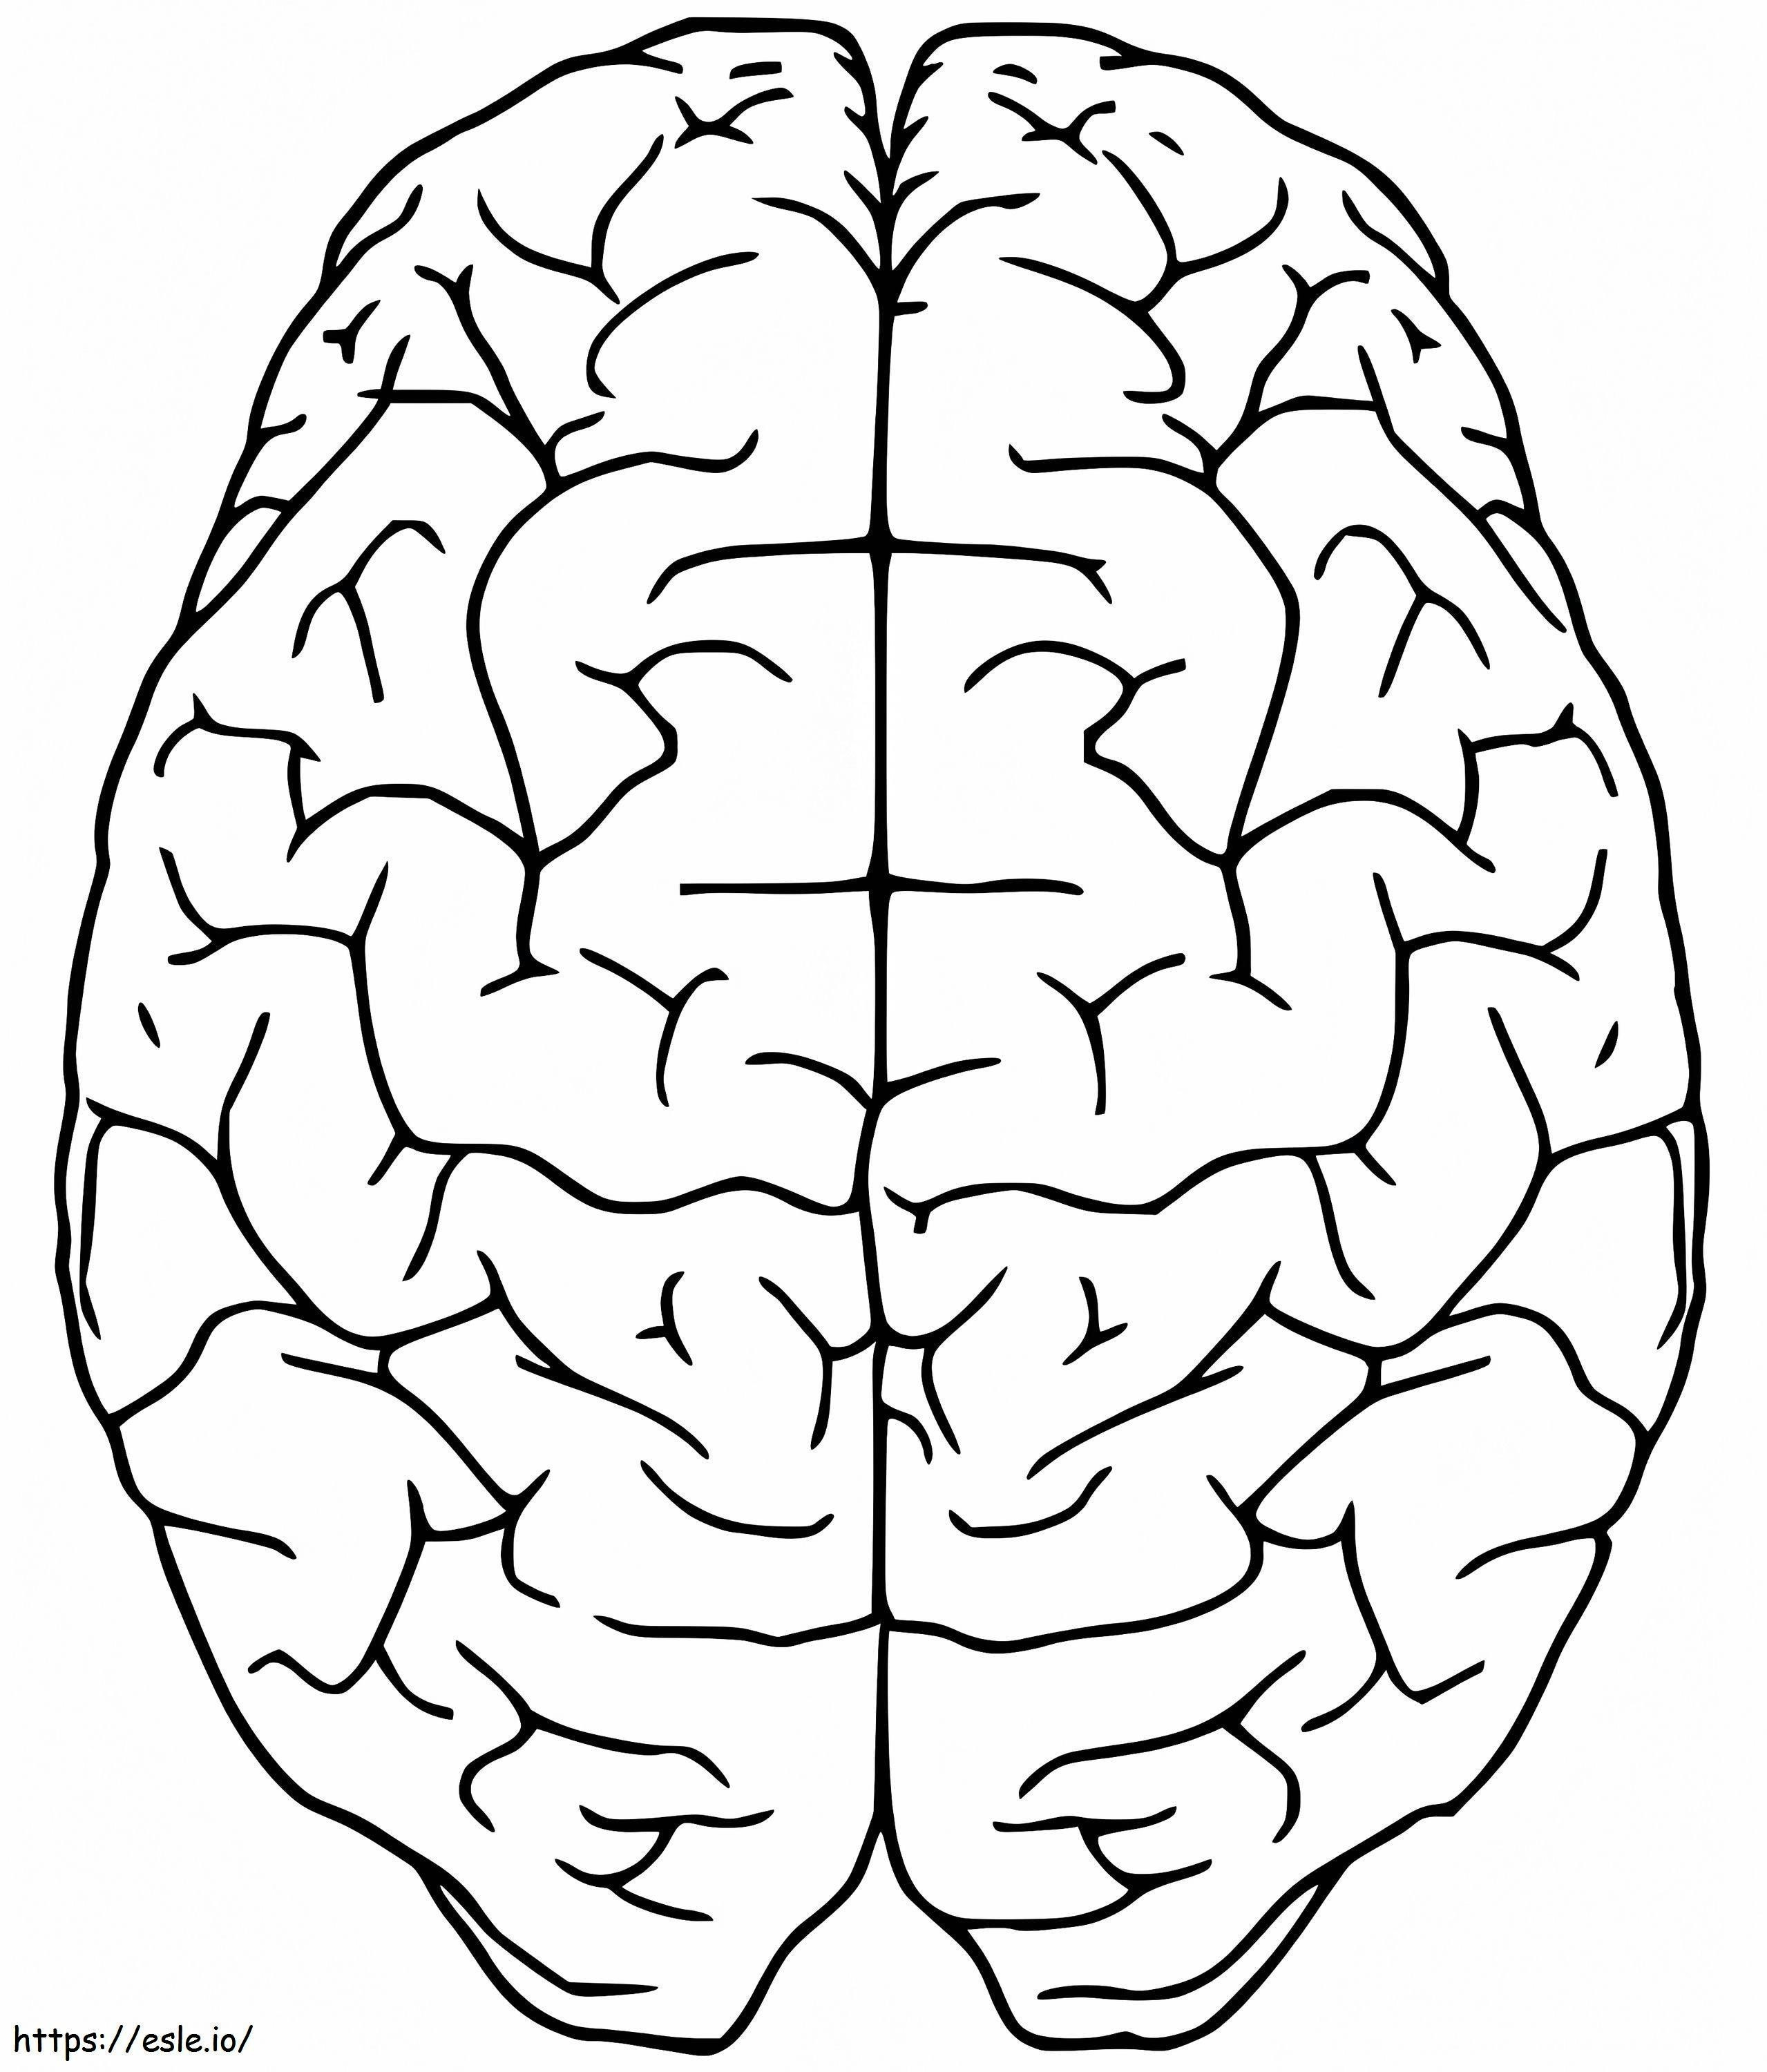 Free Human Brain coloring page